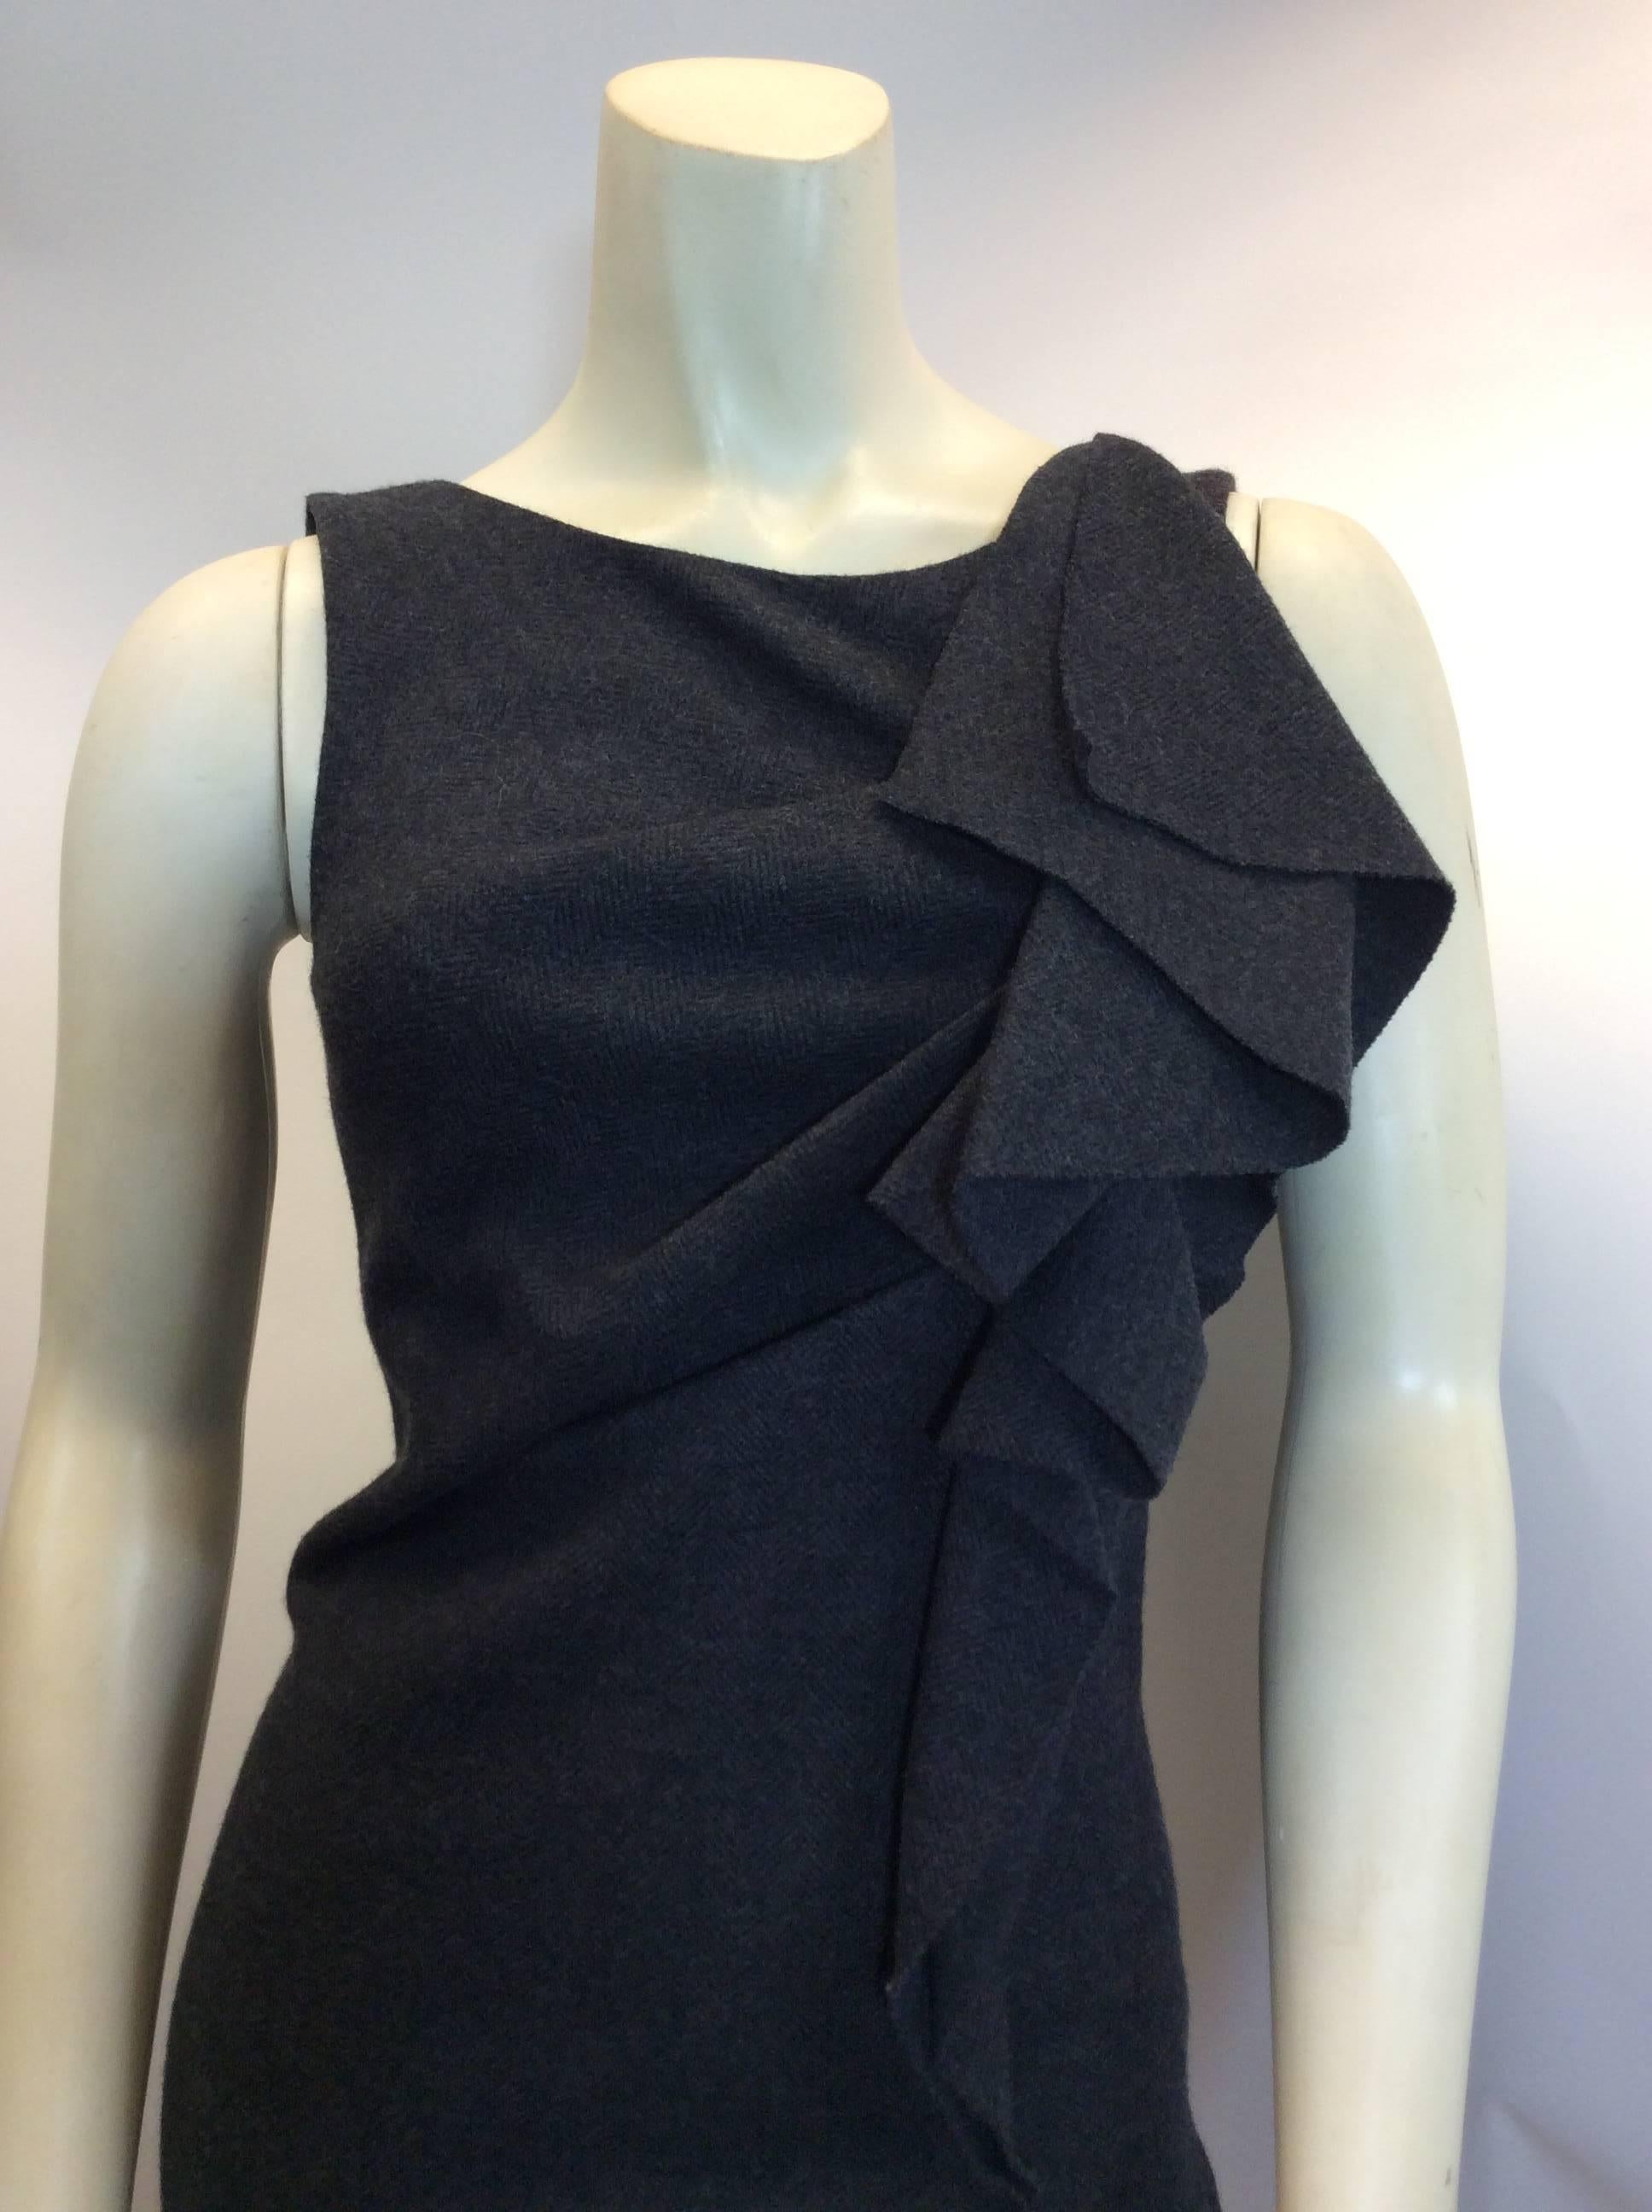 Max Mara Gray Wool NWT Dress
$299
100% wool, interior fully lined
Original price: $665
Size 6
Made in Italy